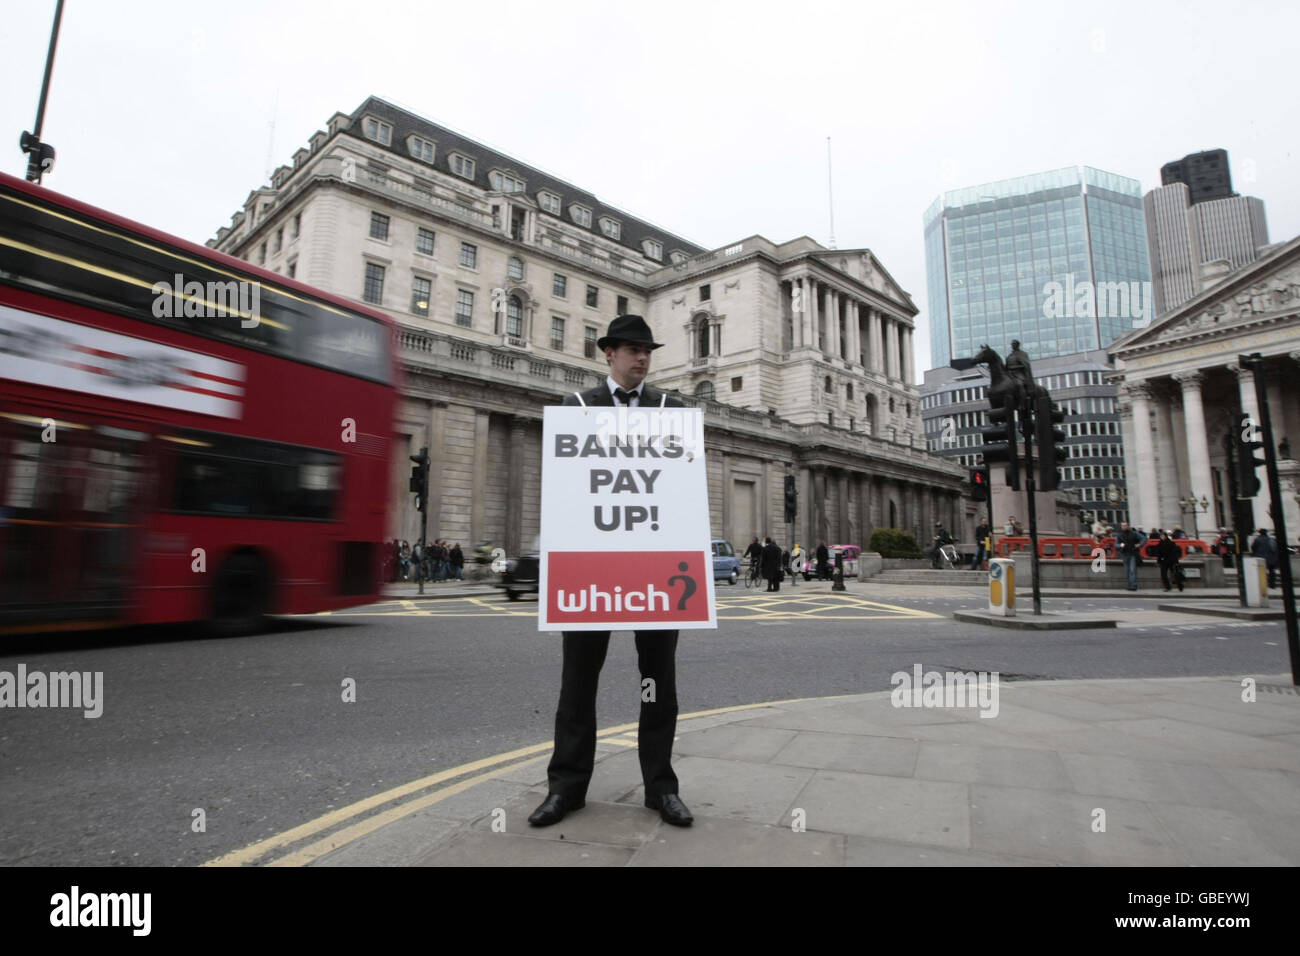 A man wearing a sandwich board protests on behalf of Which? against bank charges in London as the Court of Appeal publishes it's judgment on the bank charges test case today. Stock Photo